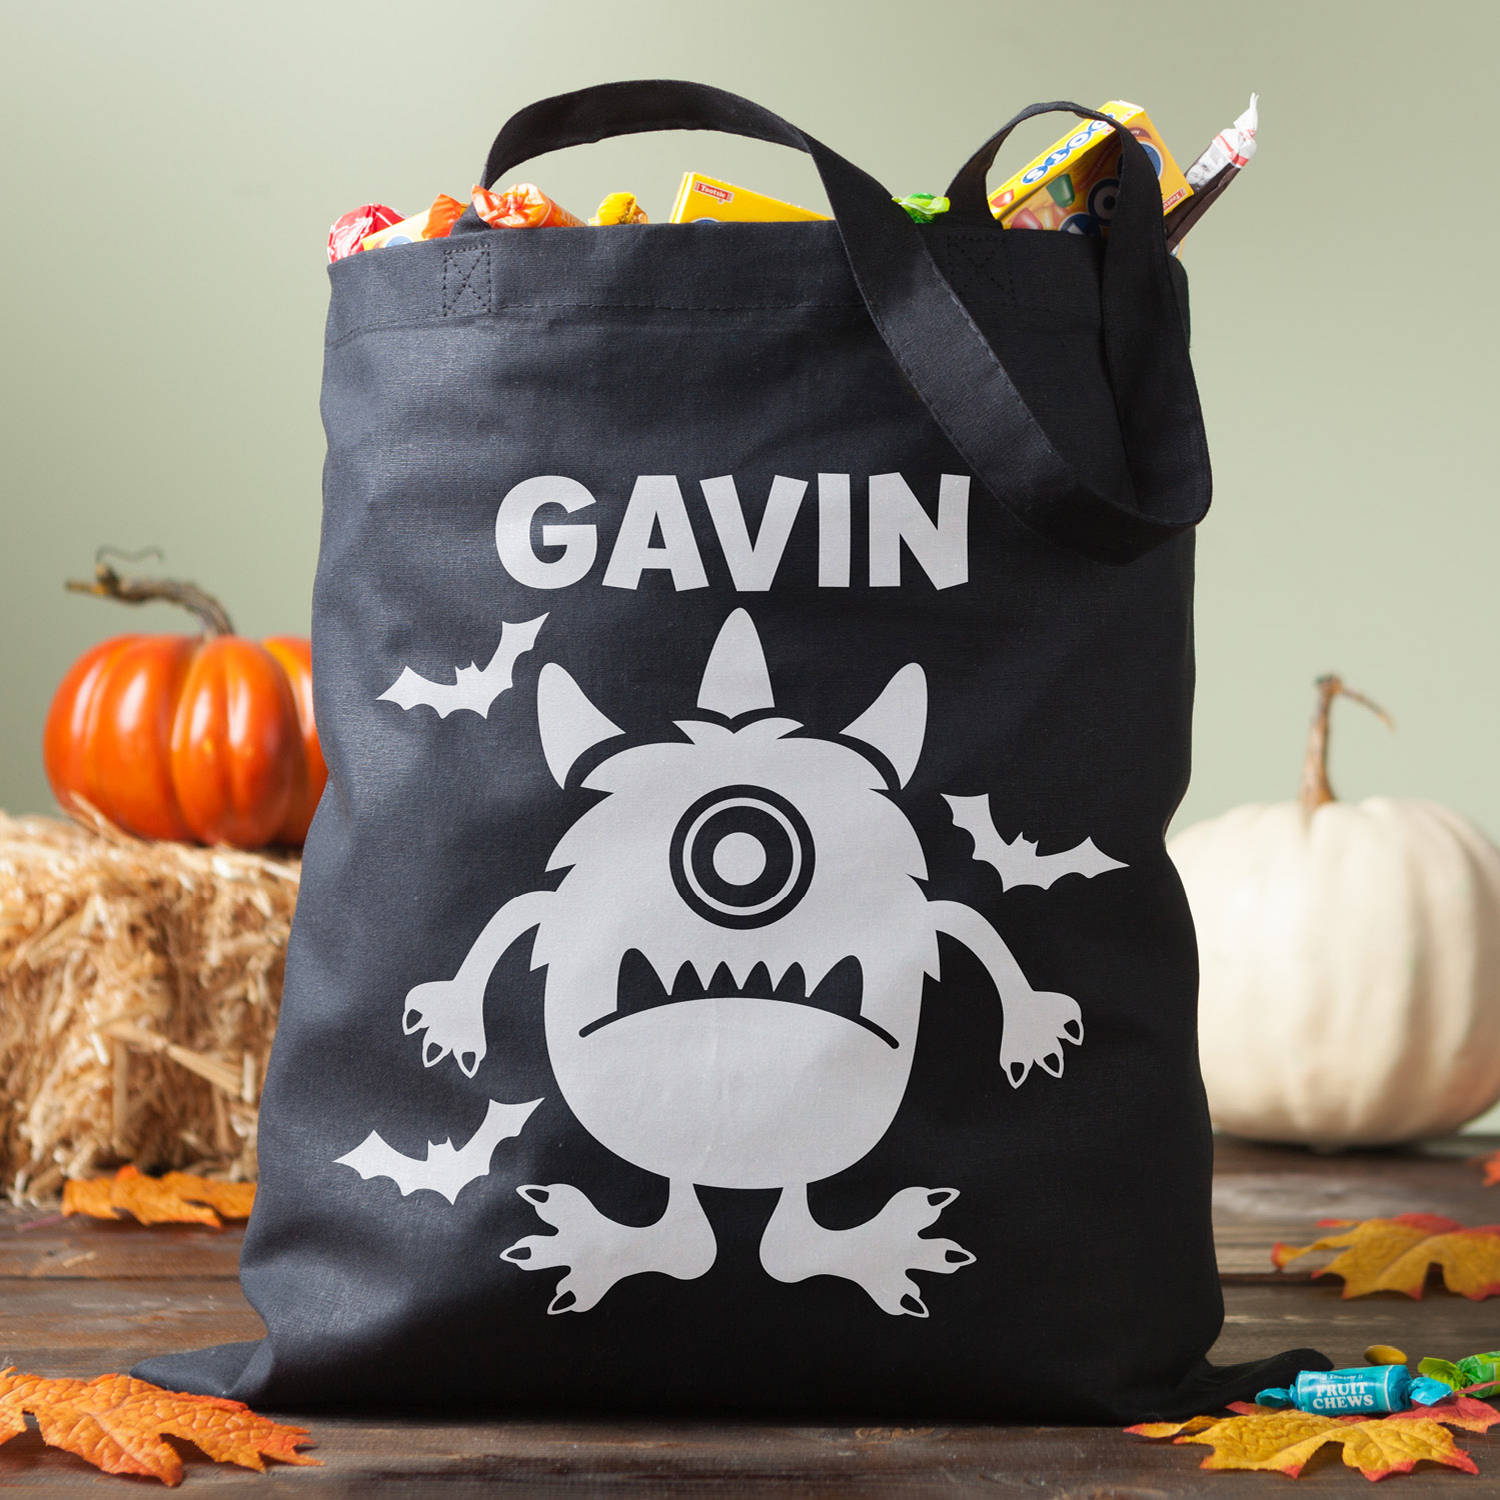 Personalized Halloween Trick or Treat Bags Halloween Treat Candy Bags   ZeLine